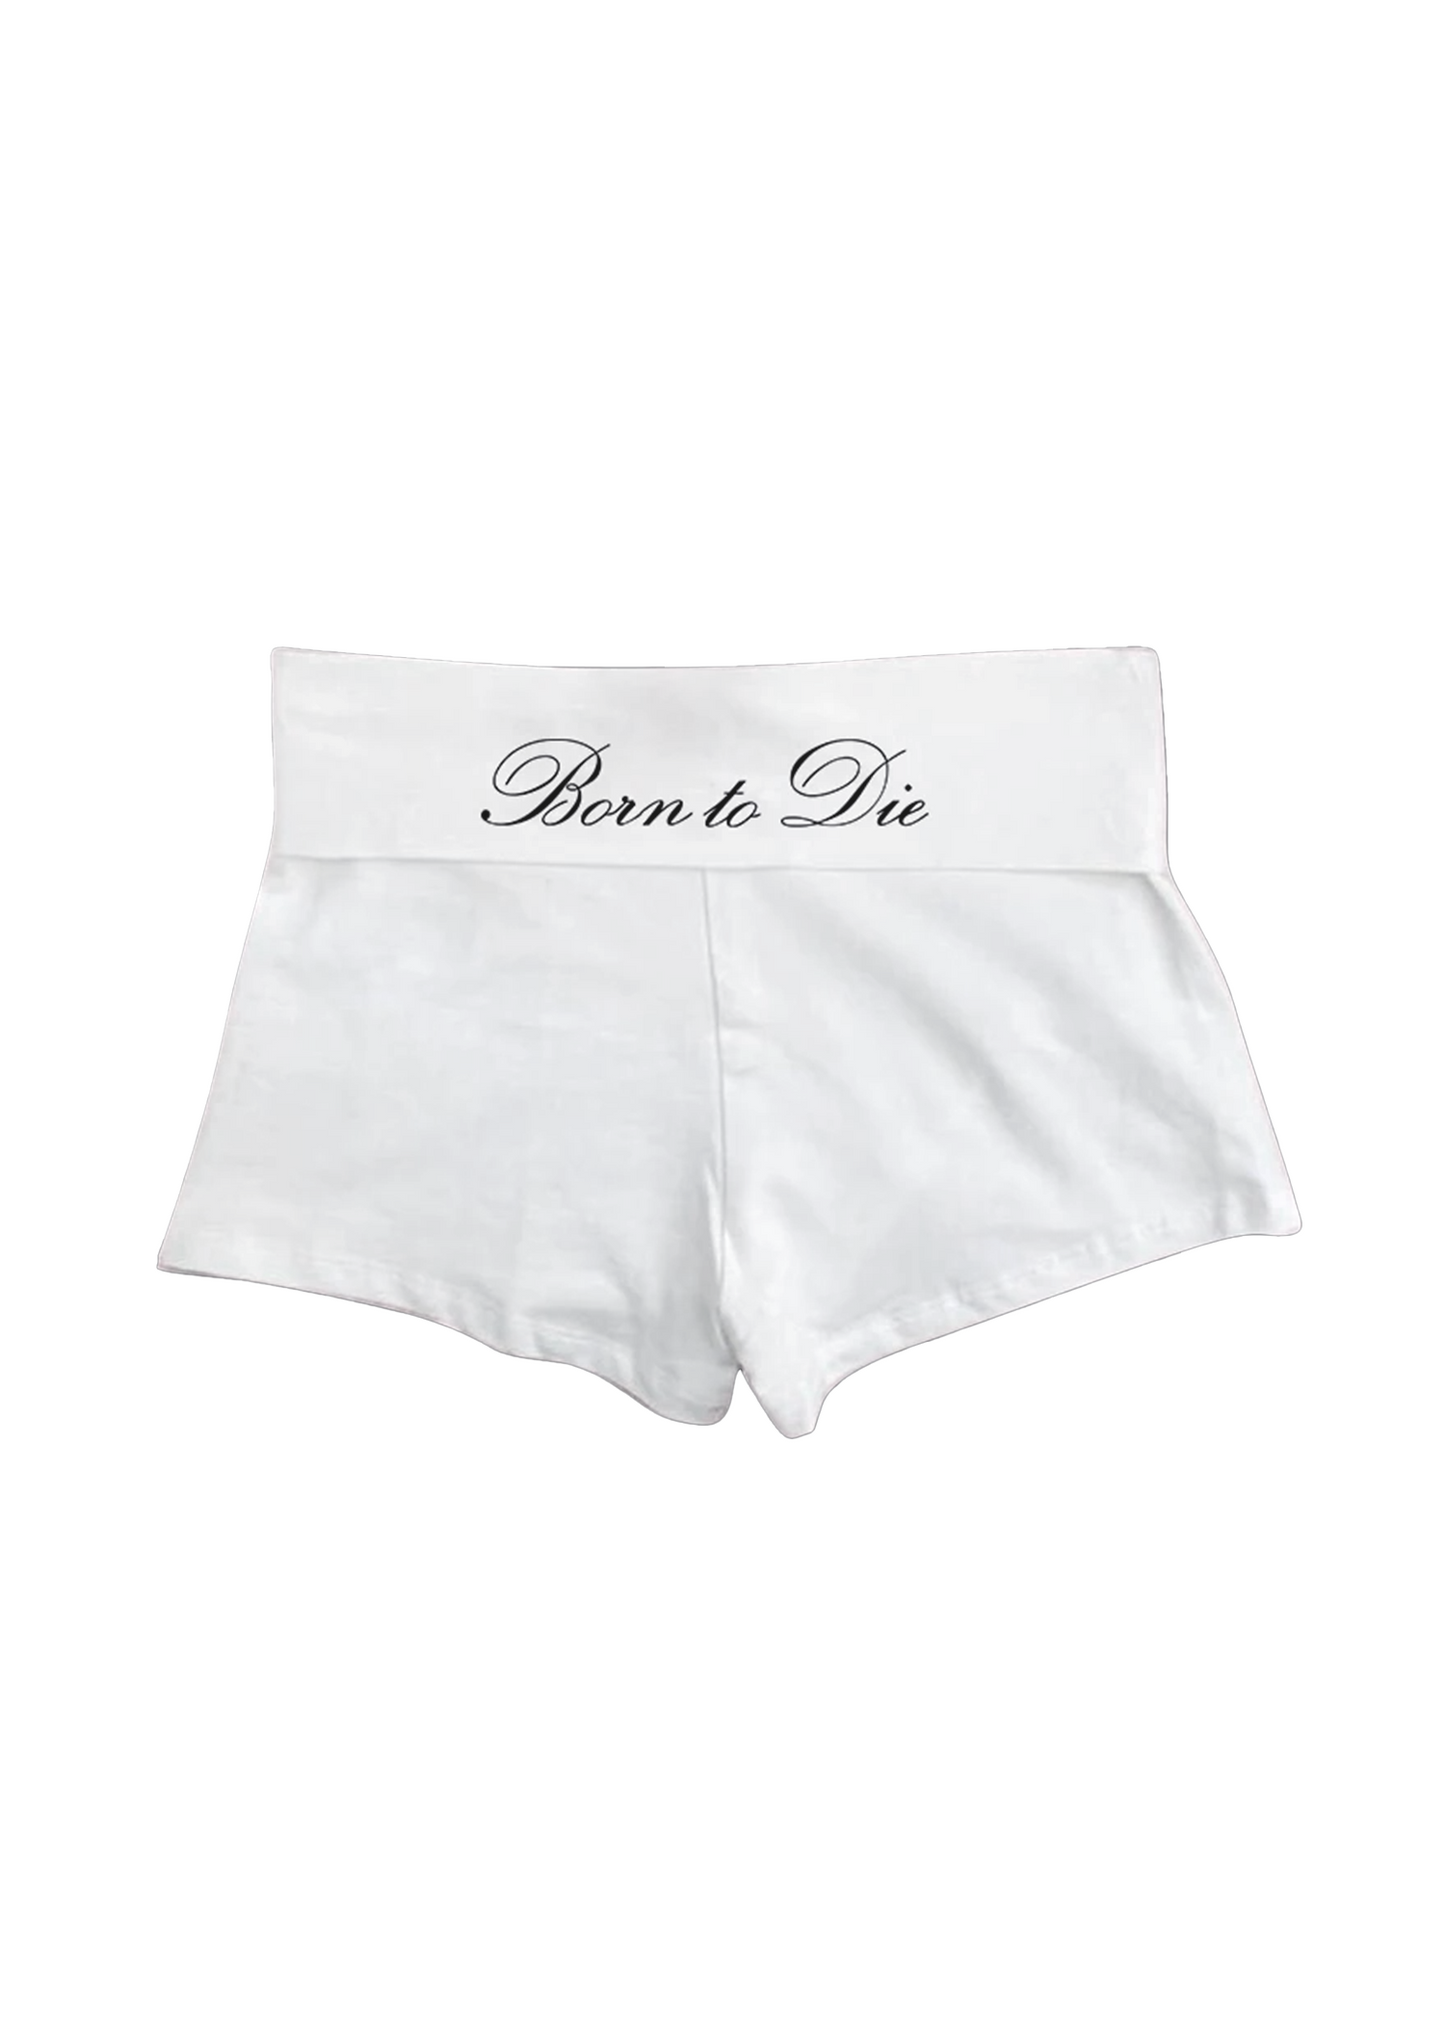 Born to Die Boxer Shorts